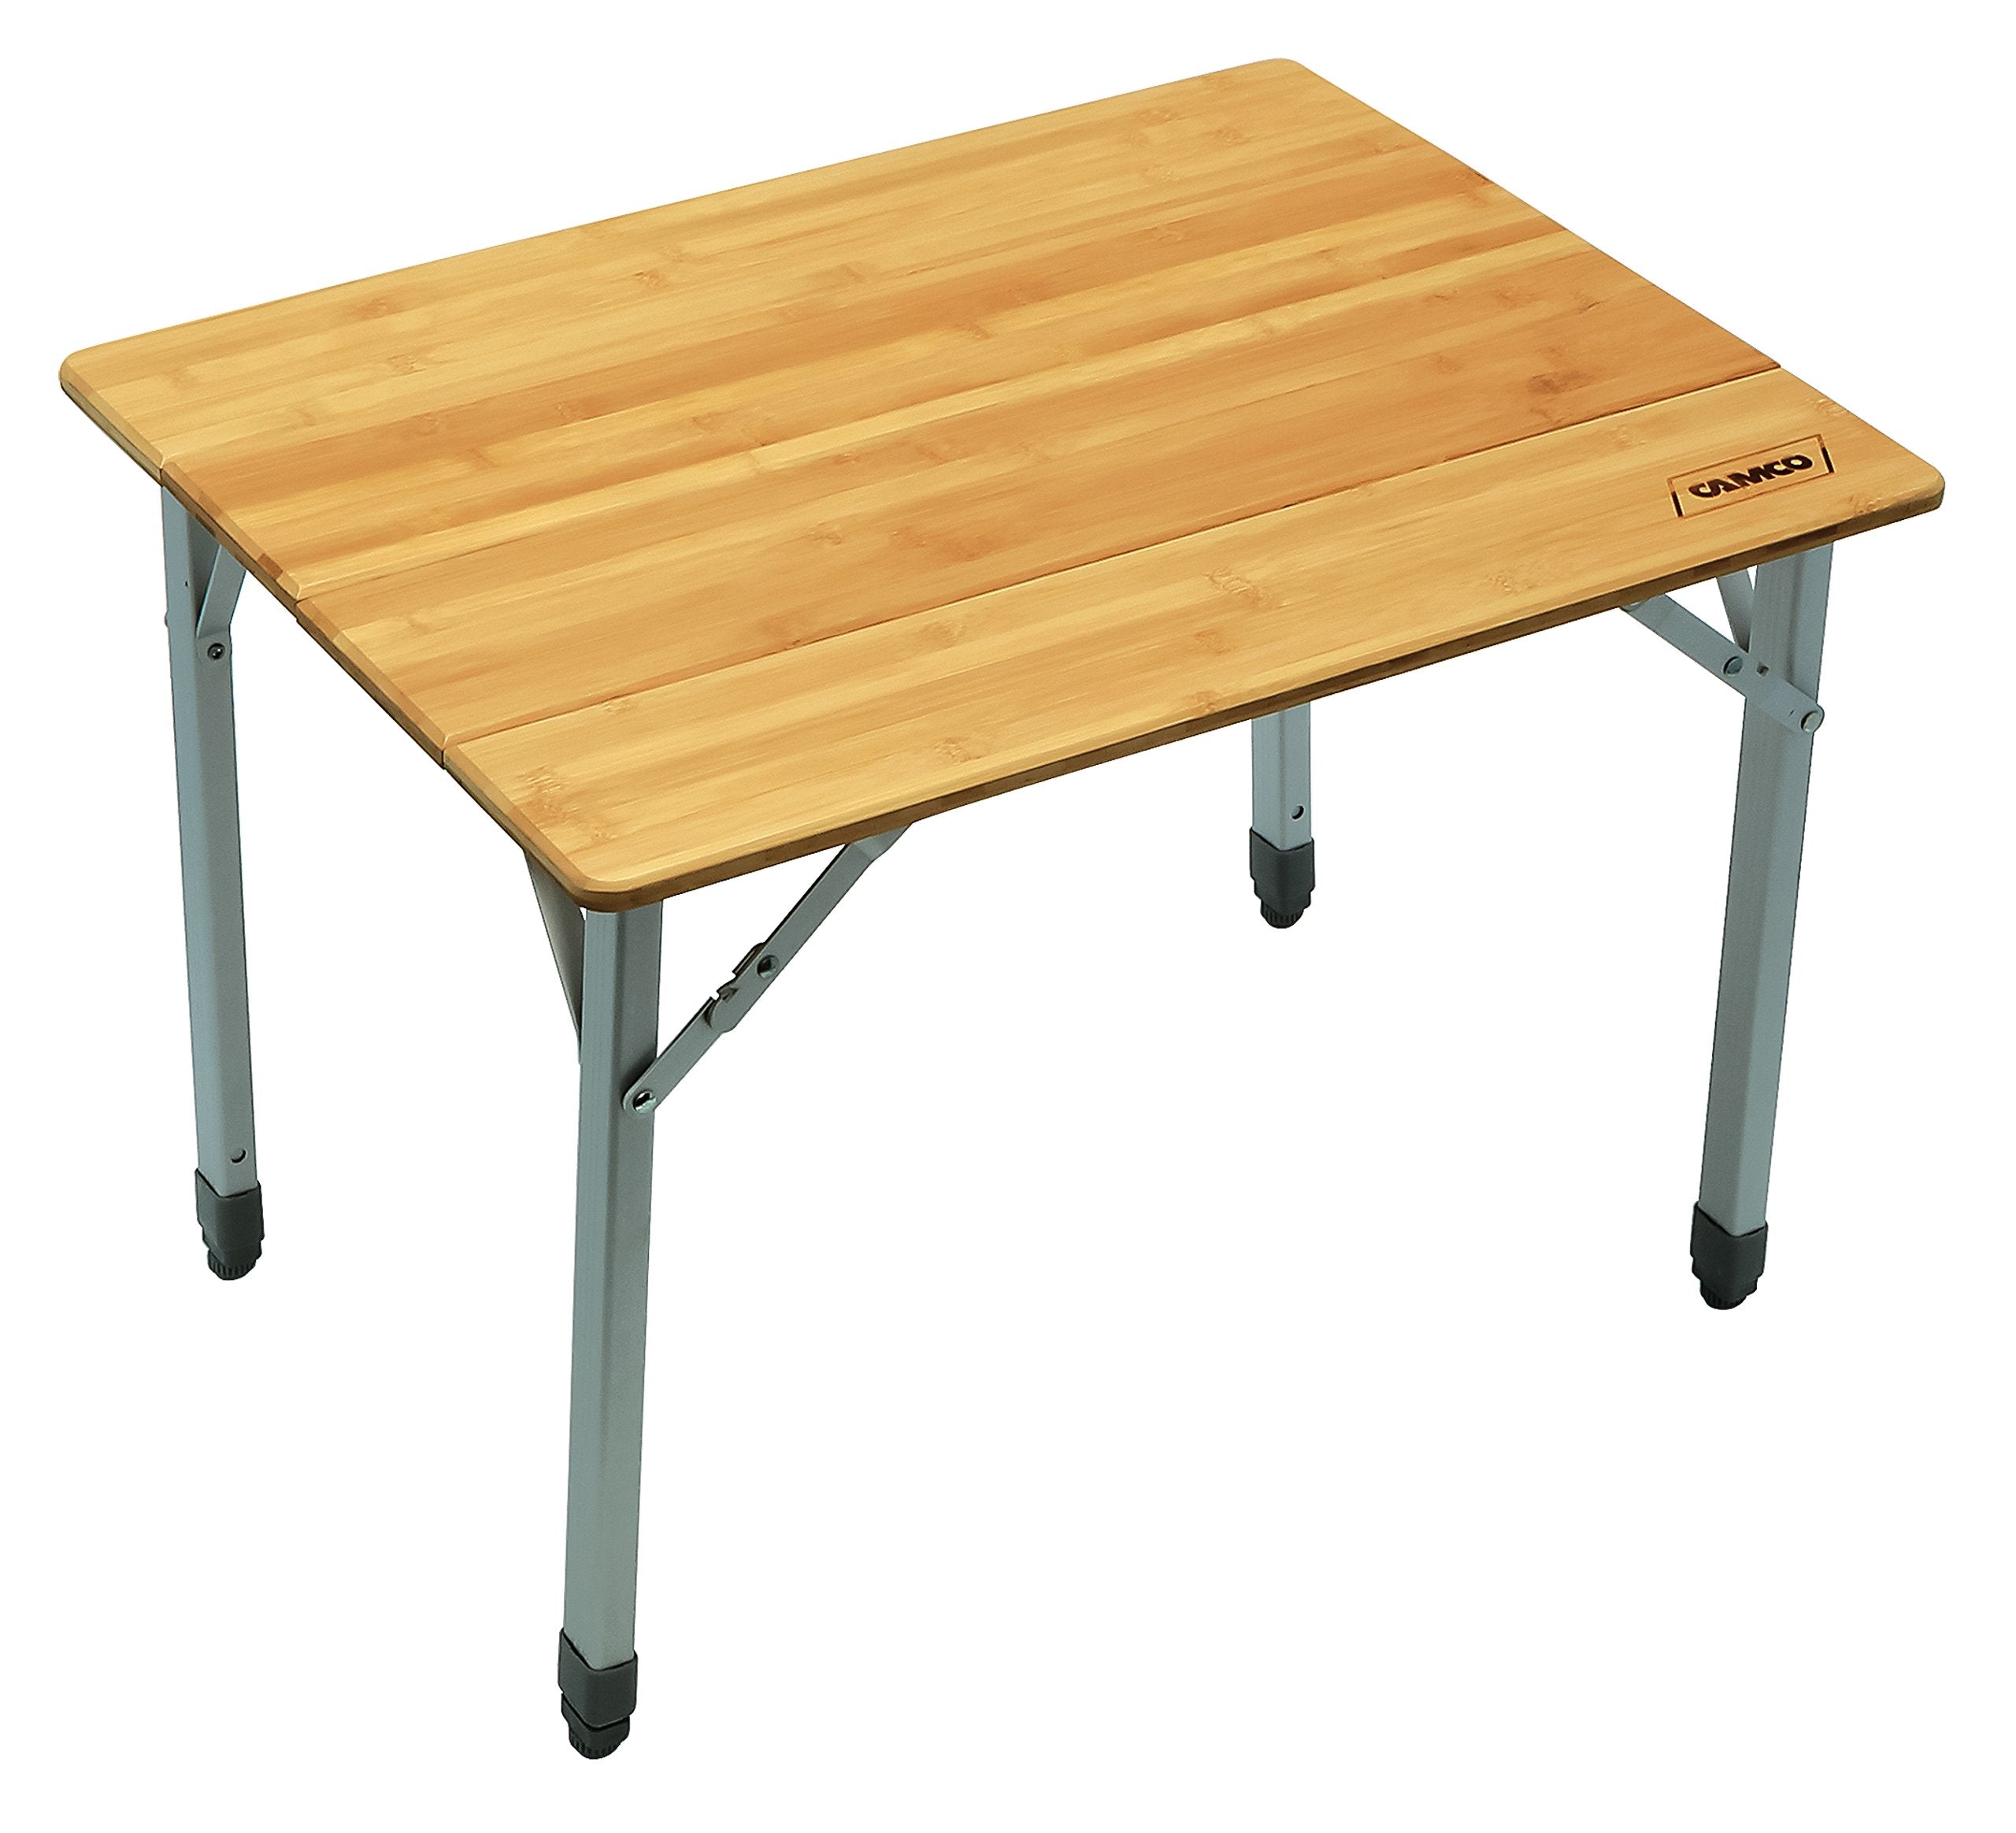 Camco 51895 Bamboo Folding Table Adj Height Compact (25.5x19.75x18-25.5)